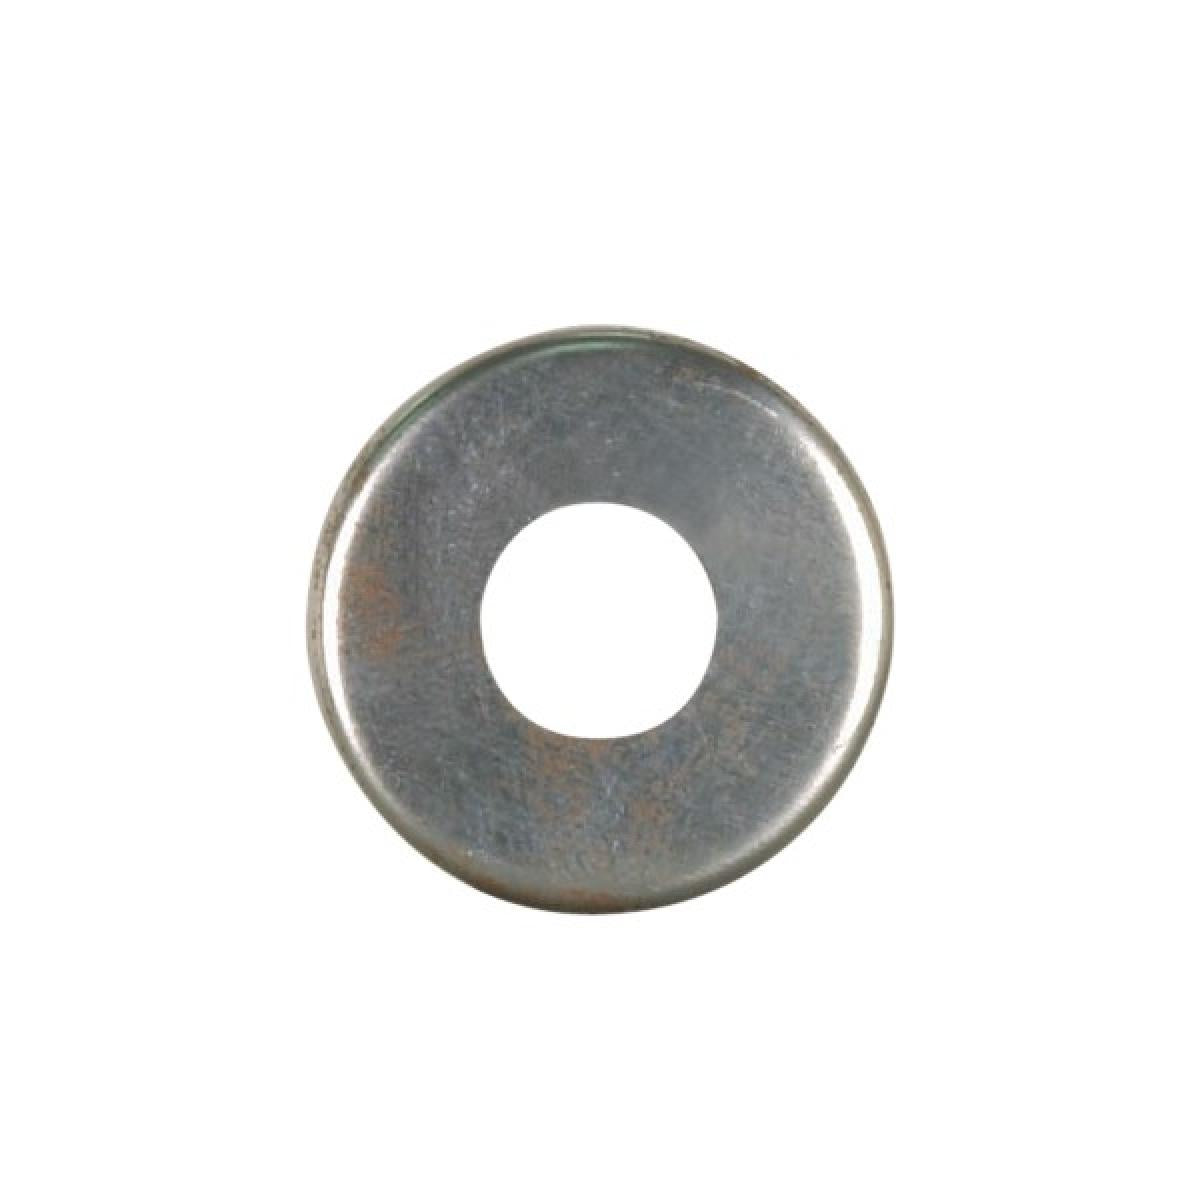 Satco 90-2050 Steel Check Ring Curled Edge 1/8 IP Slip Unfinished 1/2" Diameter